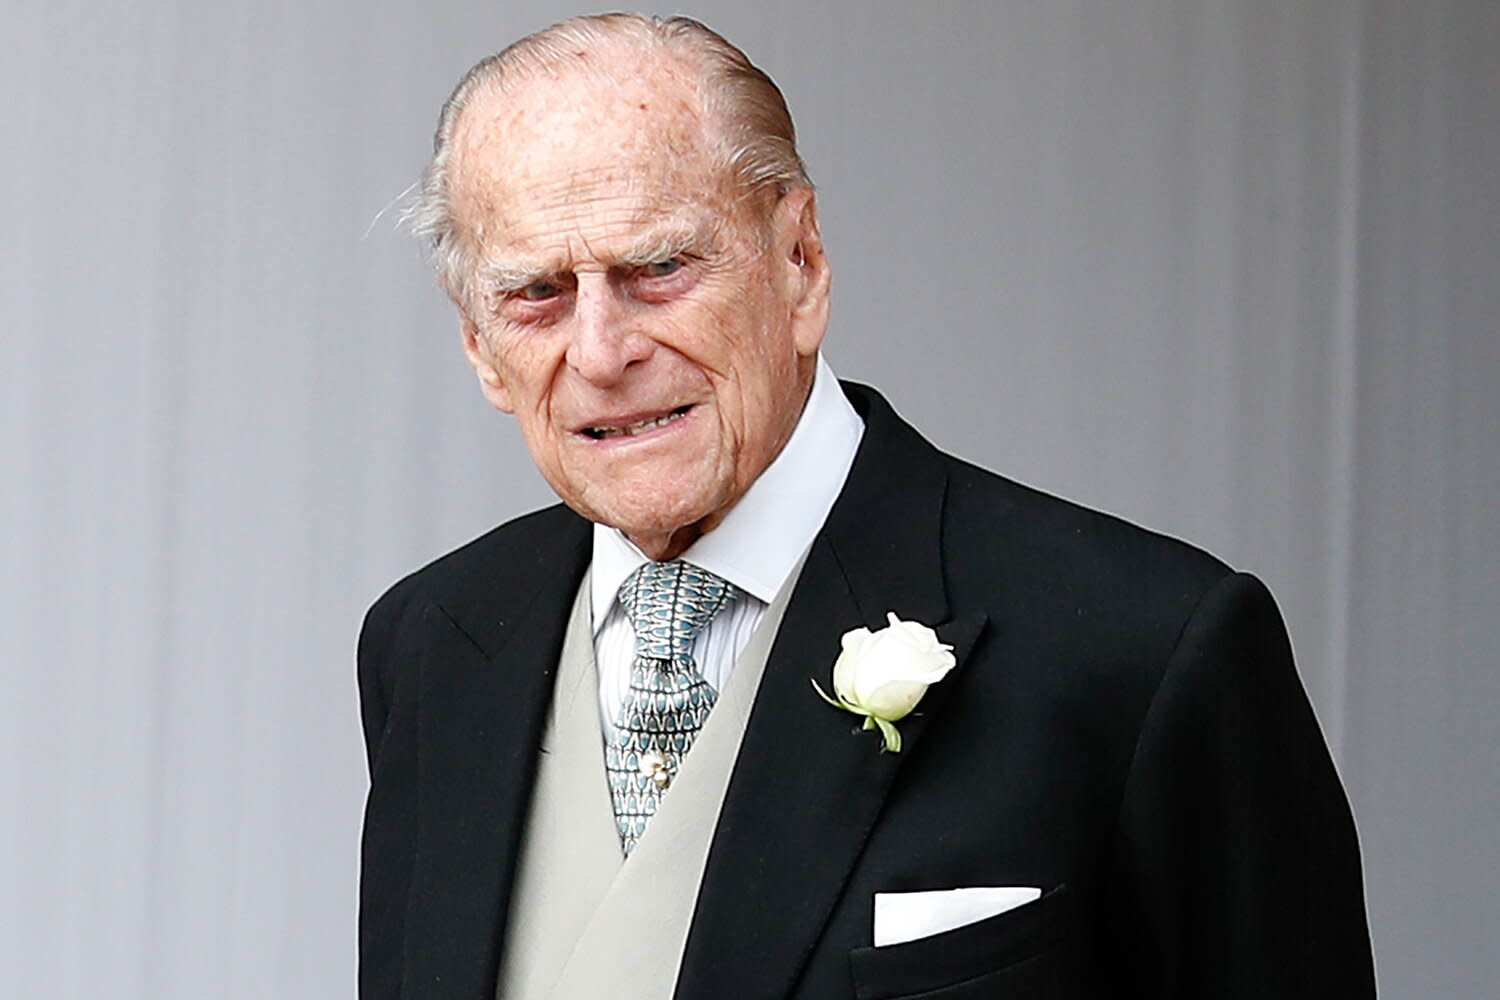 Prince Philip, 99, transferred back to private hospital after successful cardiac procedure